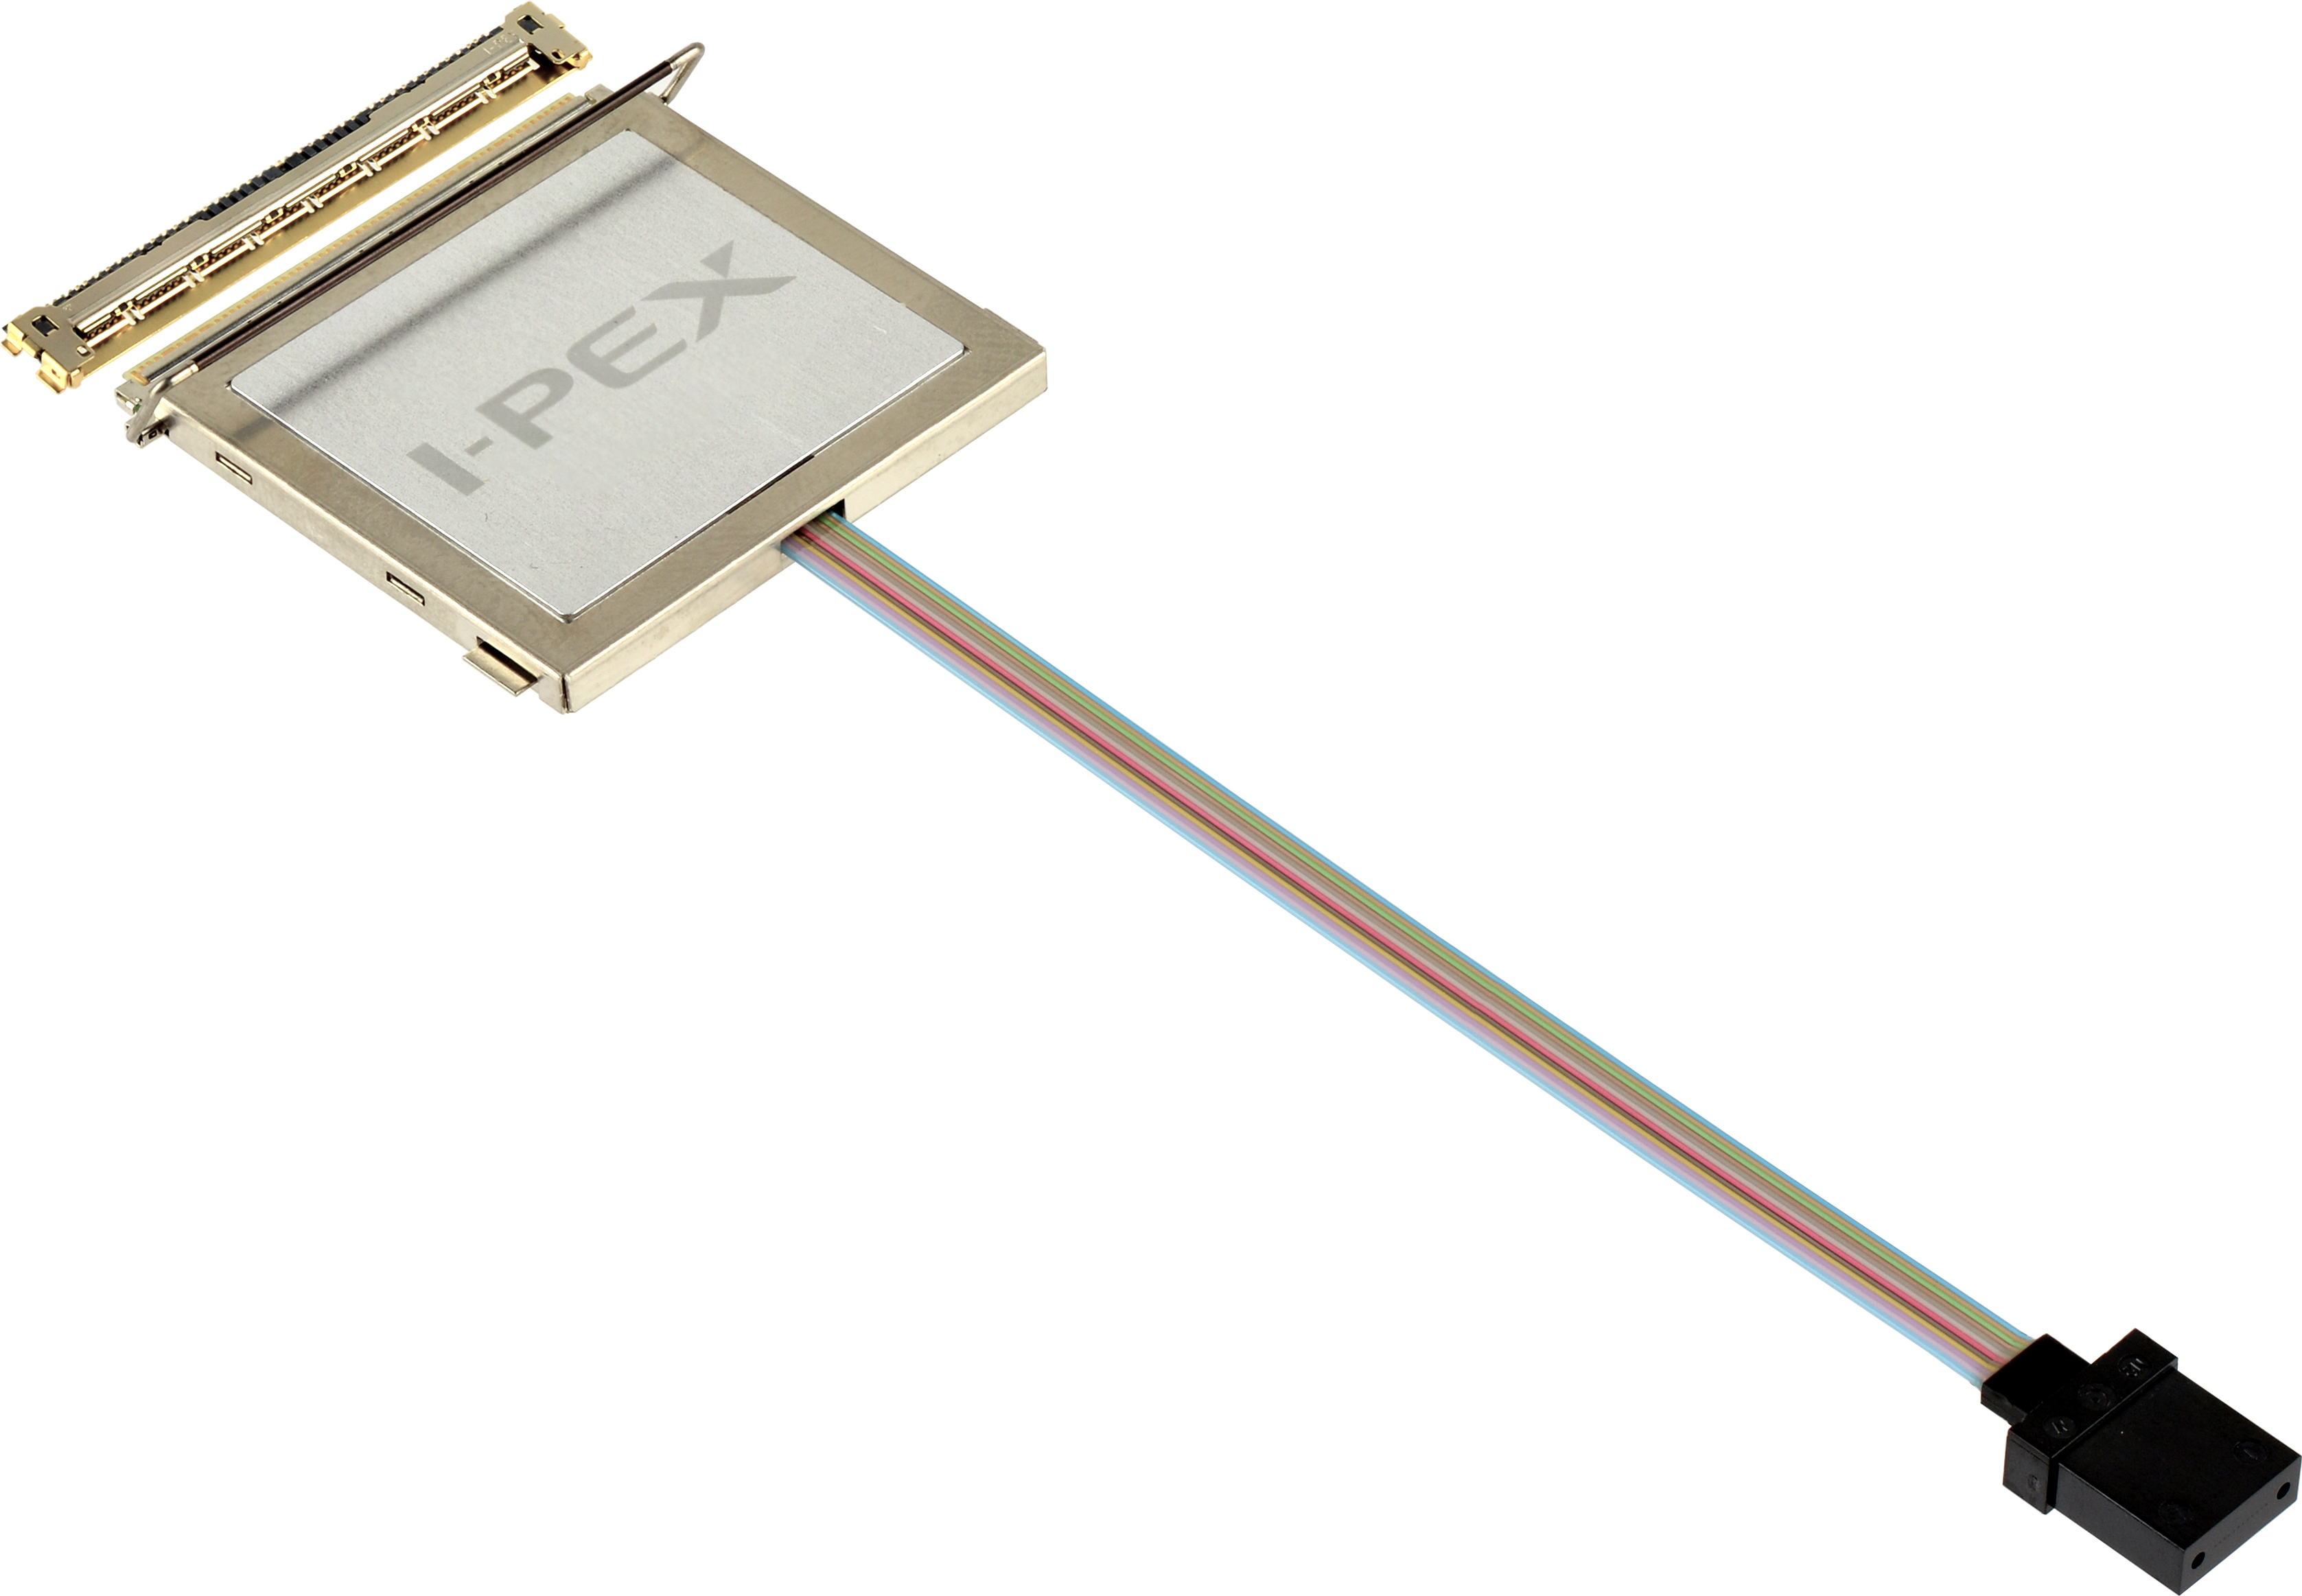 Samples of Ultra-Thin Active Optical Module LIGHTPASS™-EOB 100G Now Available from I-PEX